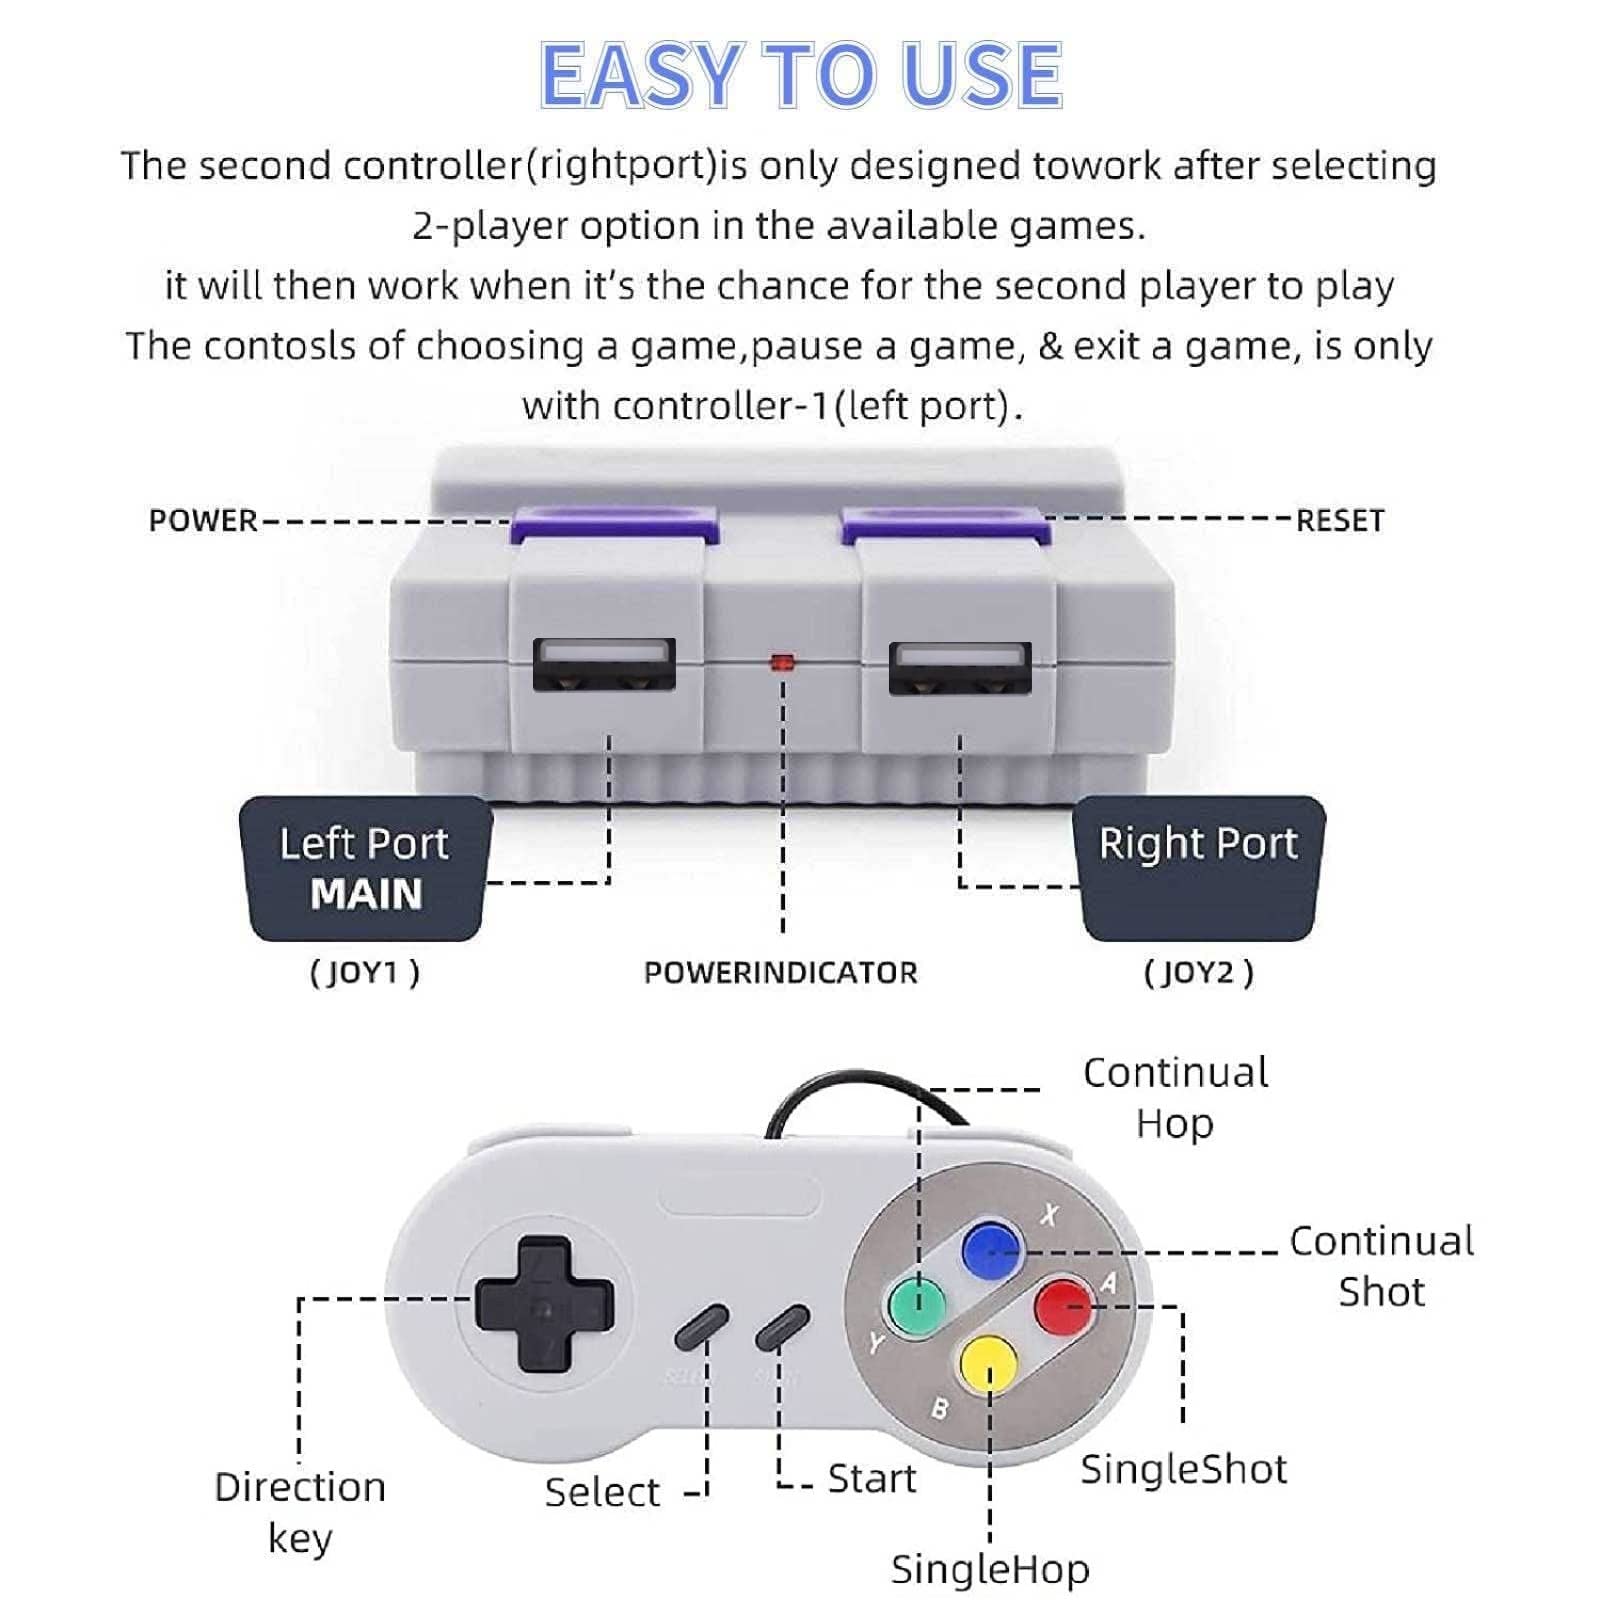 Retro Game Console, Classic Mini Game System, Built-in 800+ Classic Games, 2 Classic Controllers, AV Output Plug and Play, is a Gift for Adults and Children